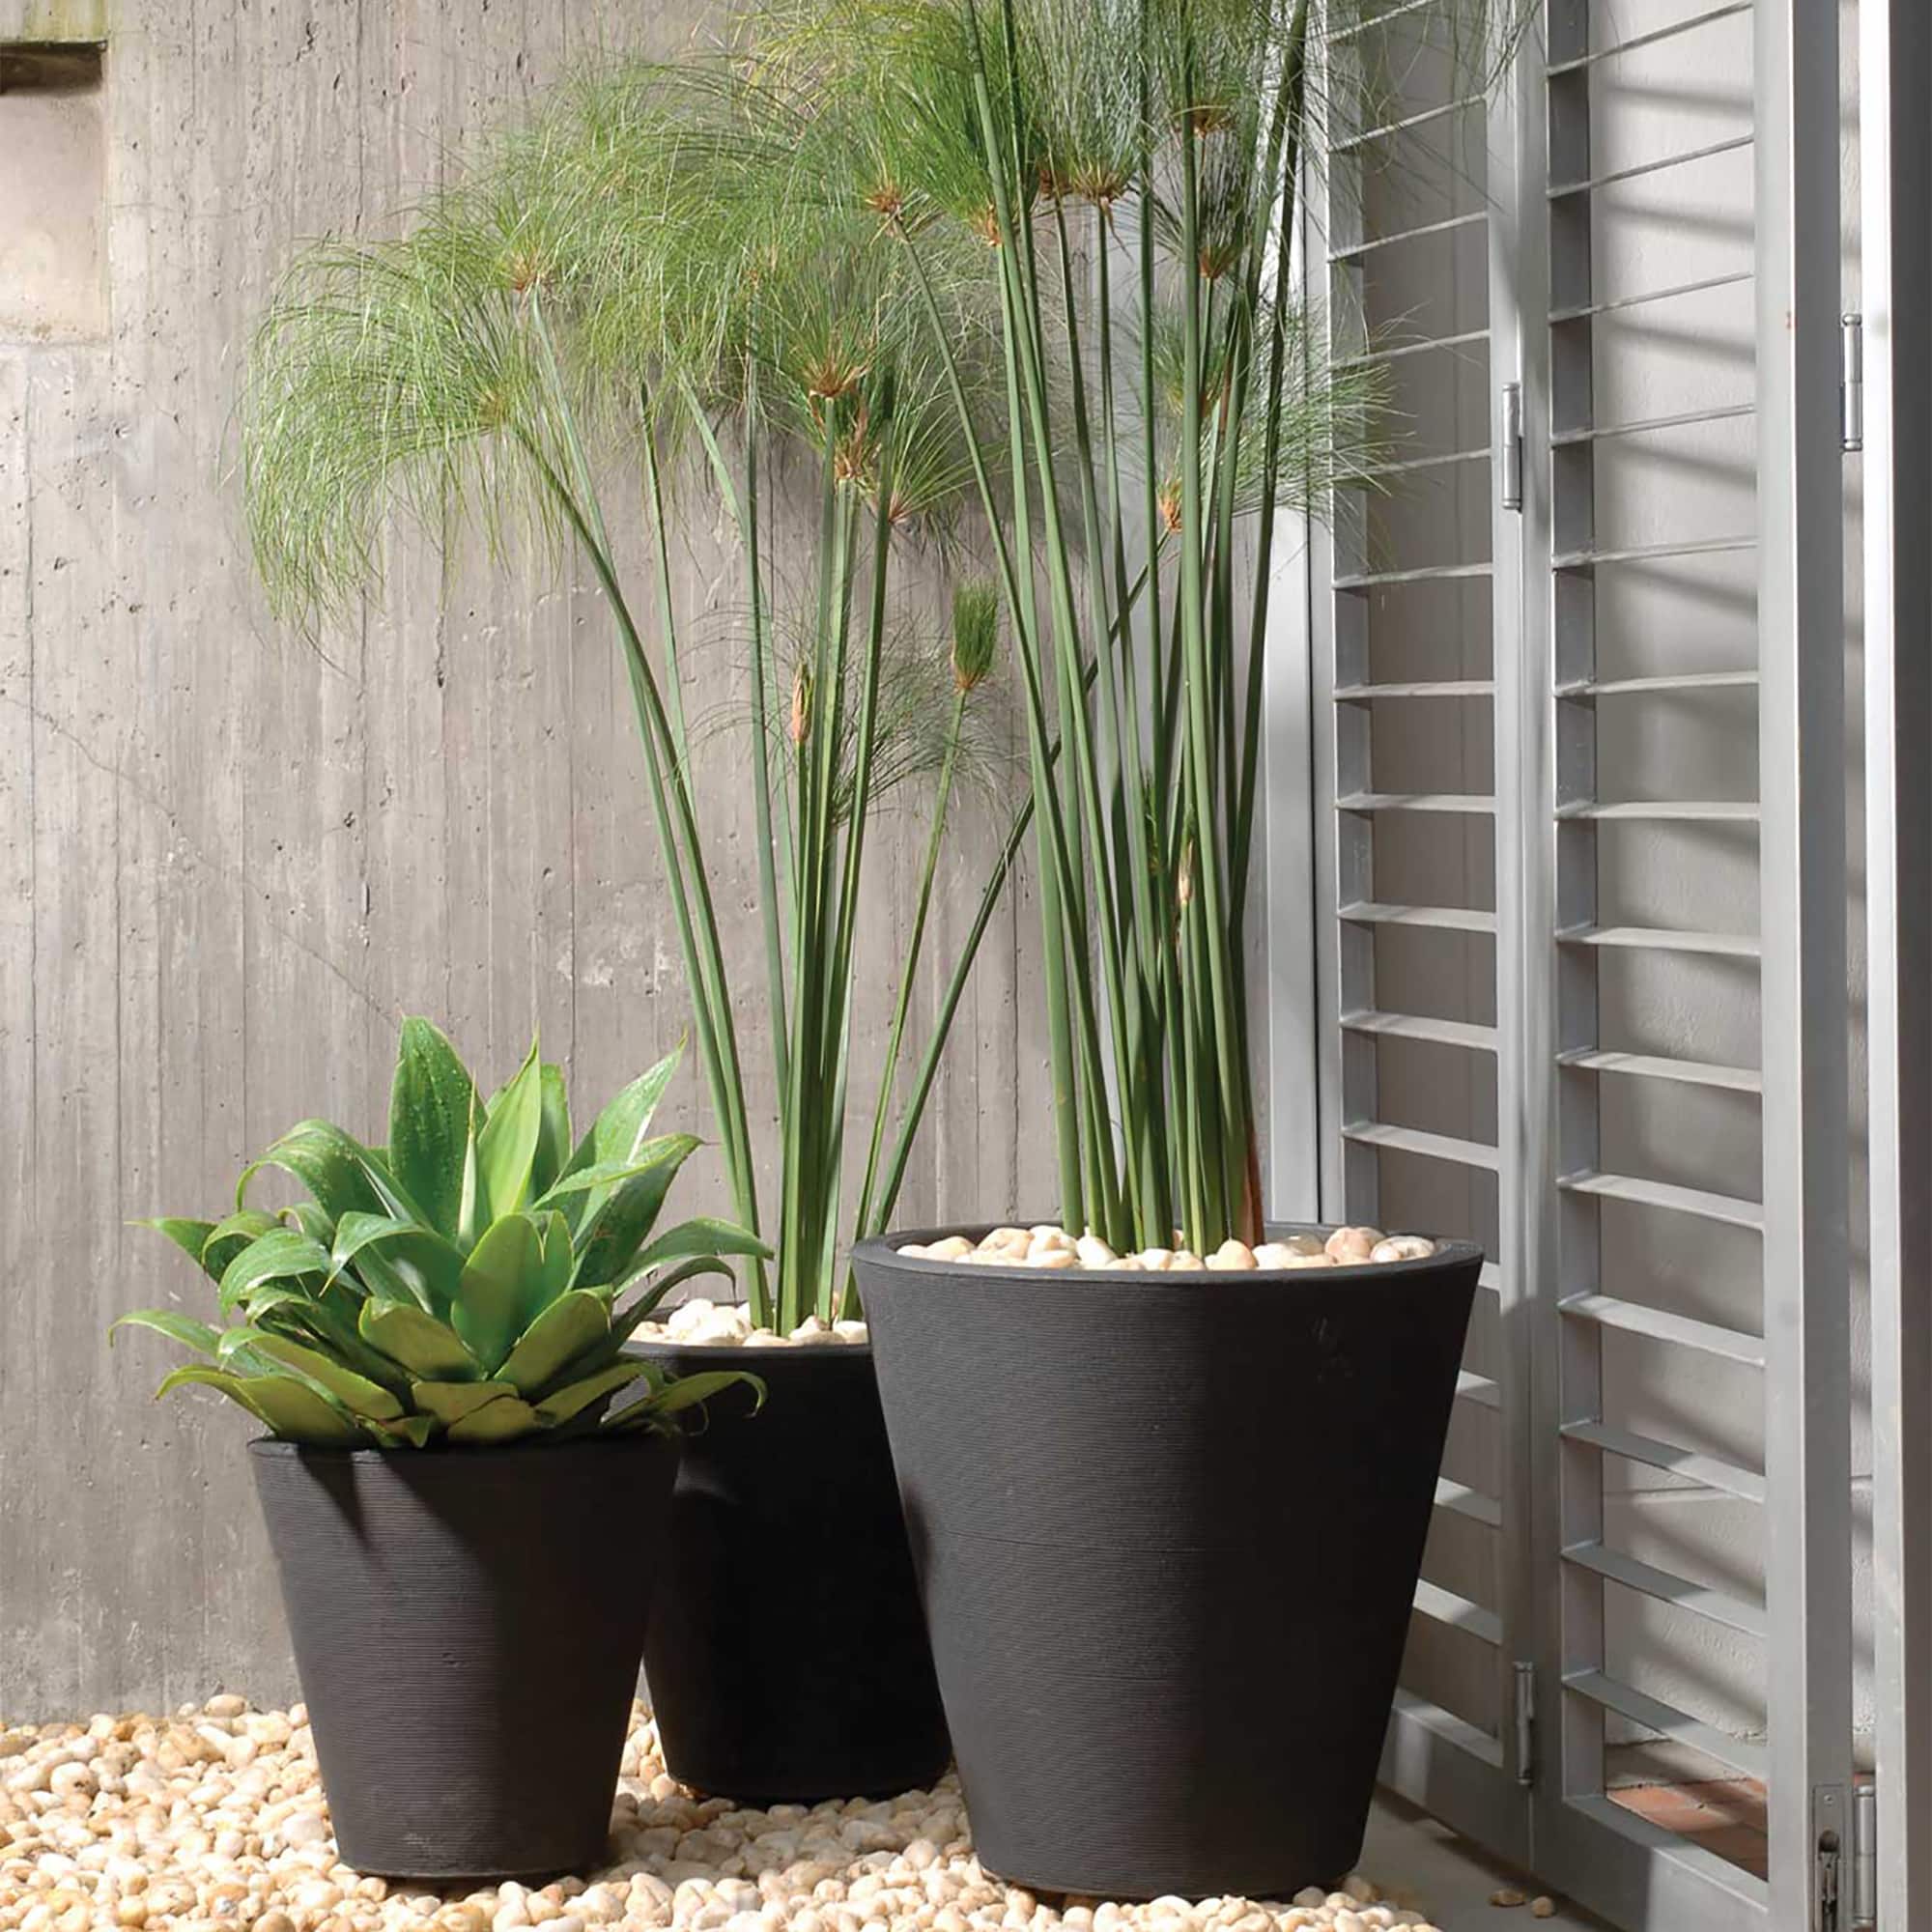 Trio of Potted Madison Planters outdoors.